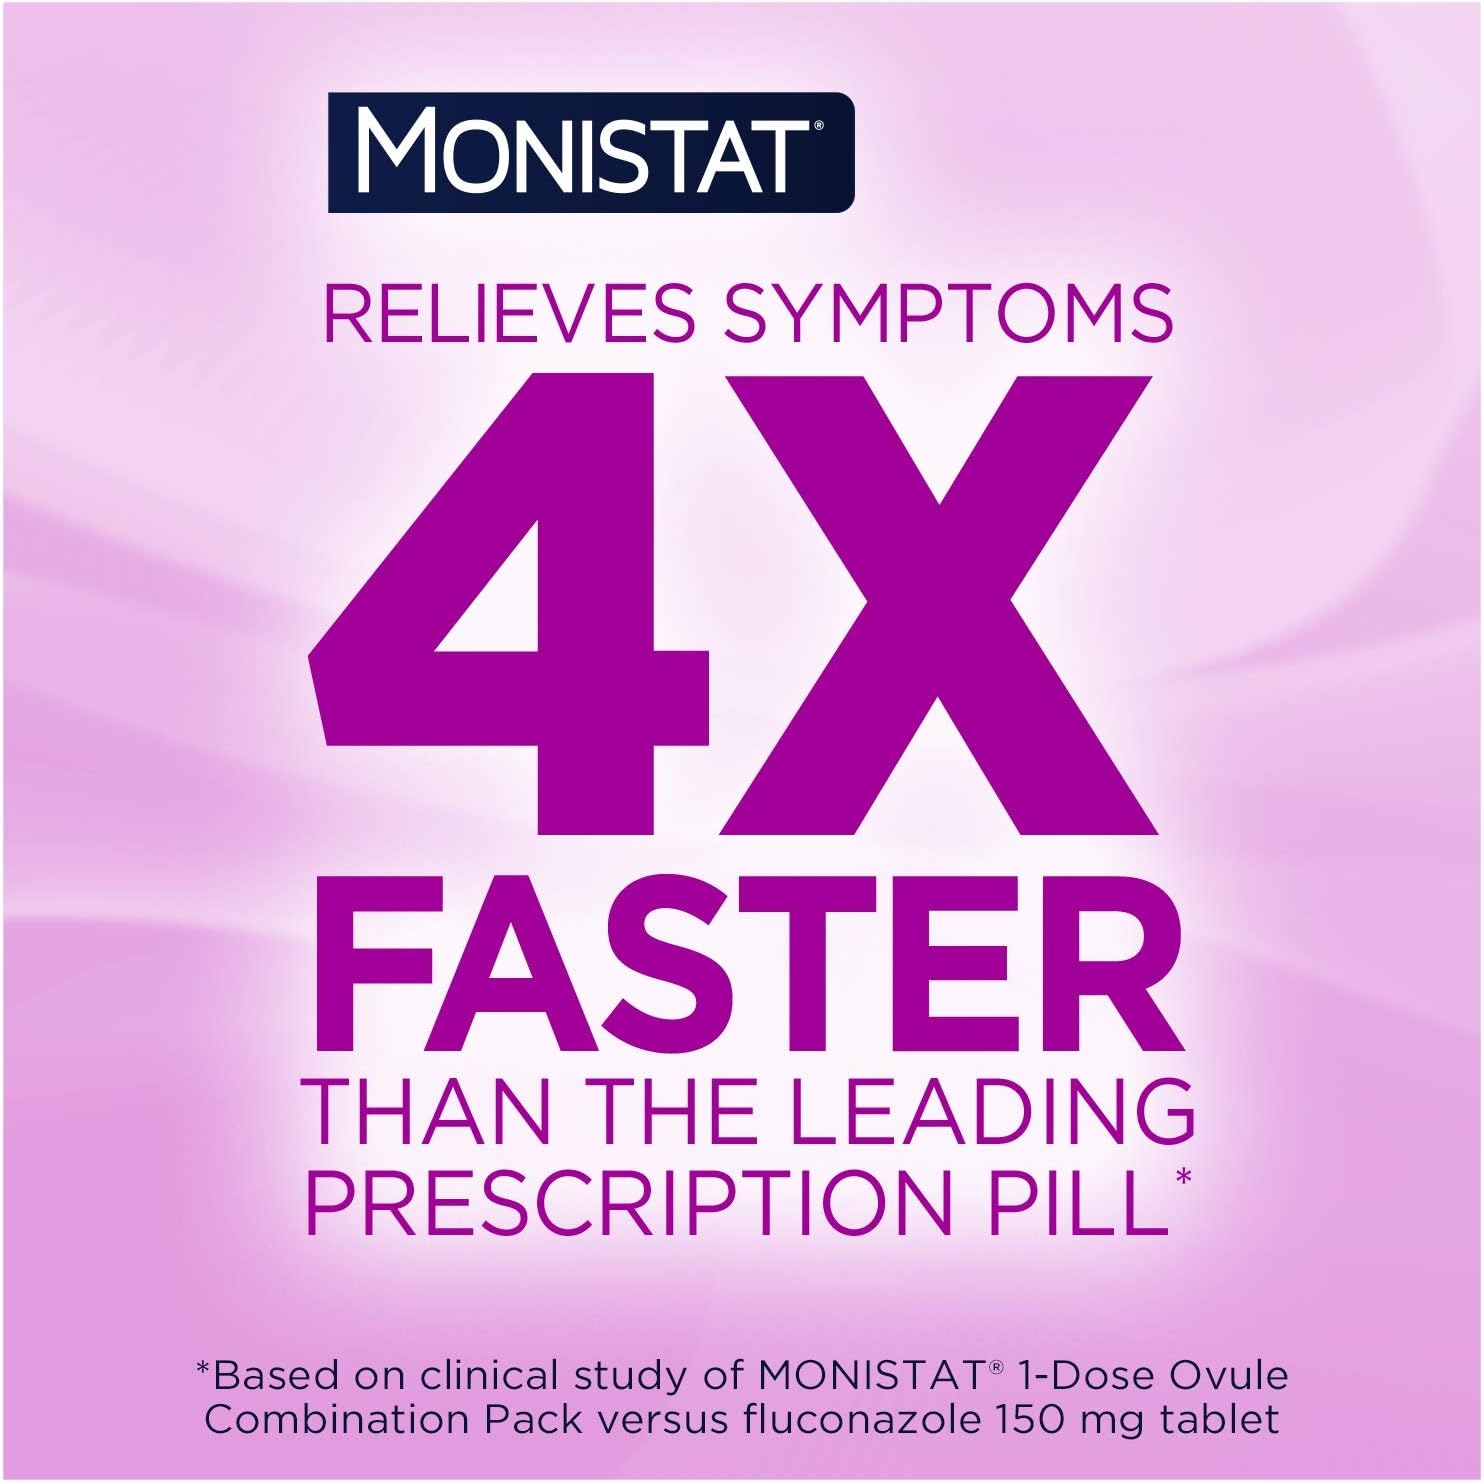 Monistat 7-Day Yeast Infection Treatment | Cream + External Itch Relief Cream